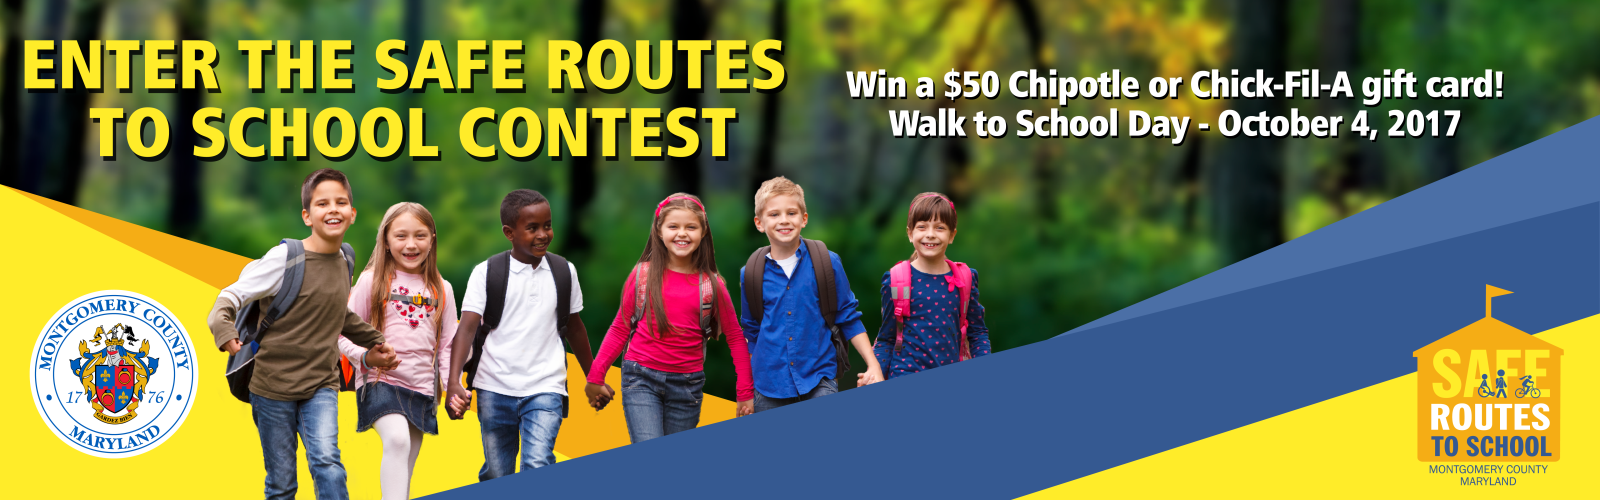 Safe Routes To School BAnner Kids going to school